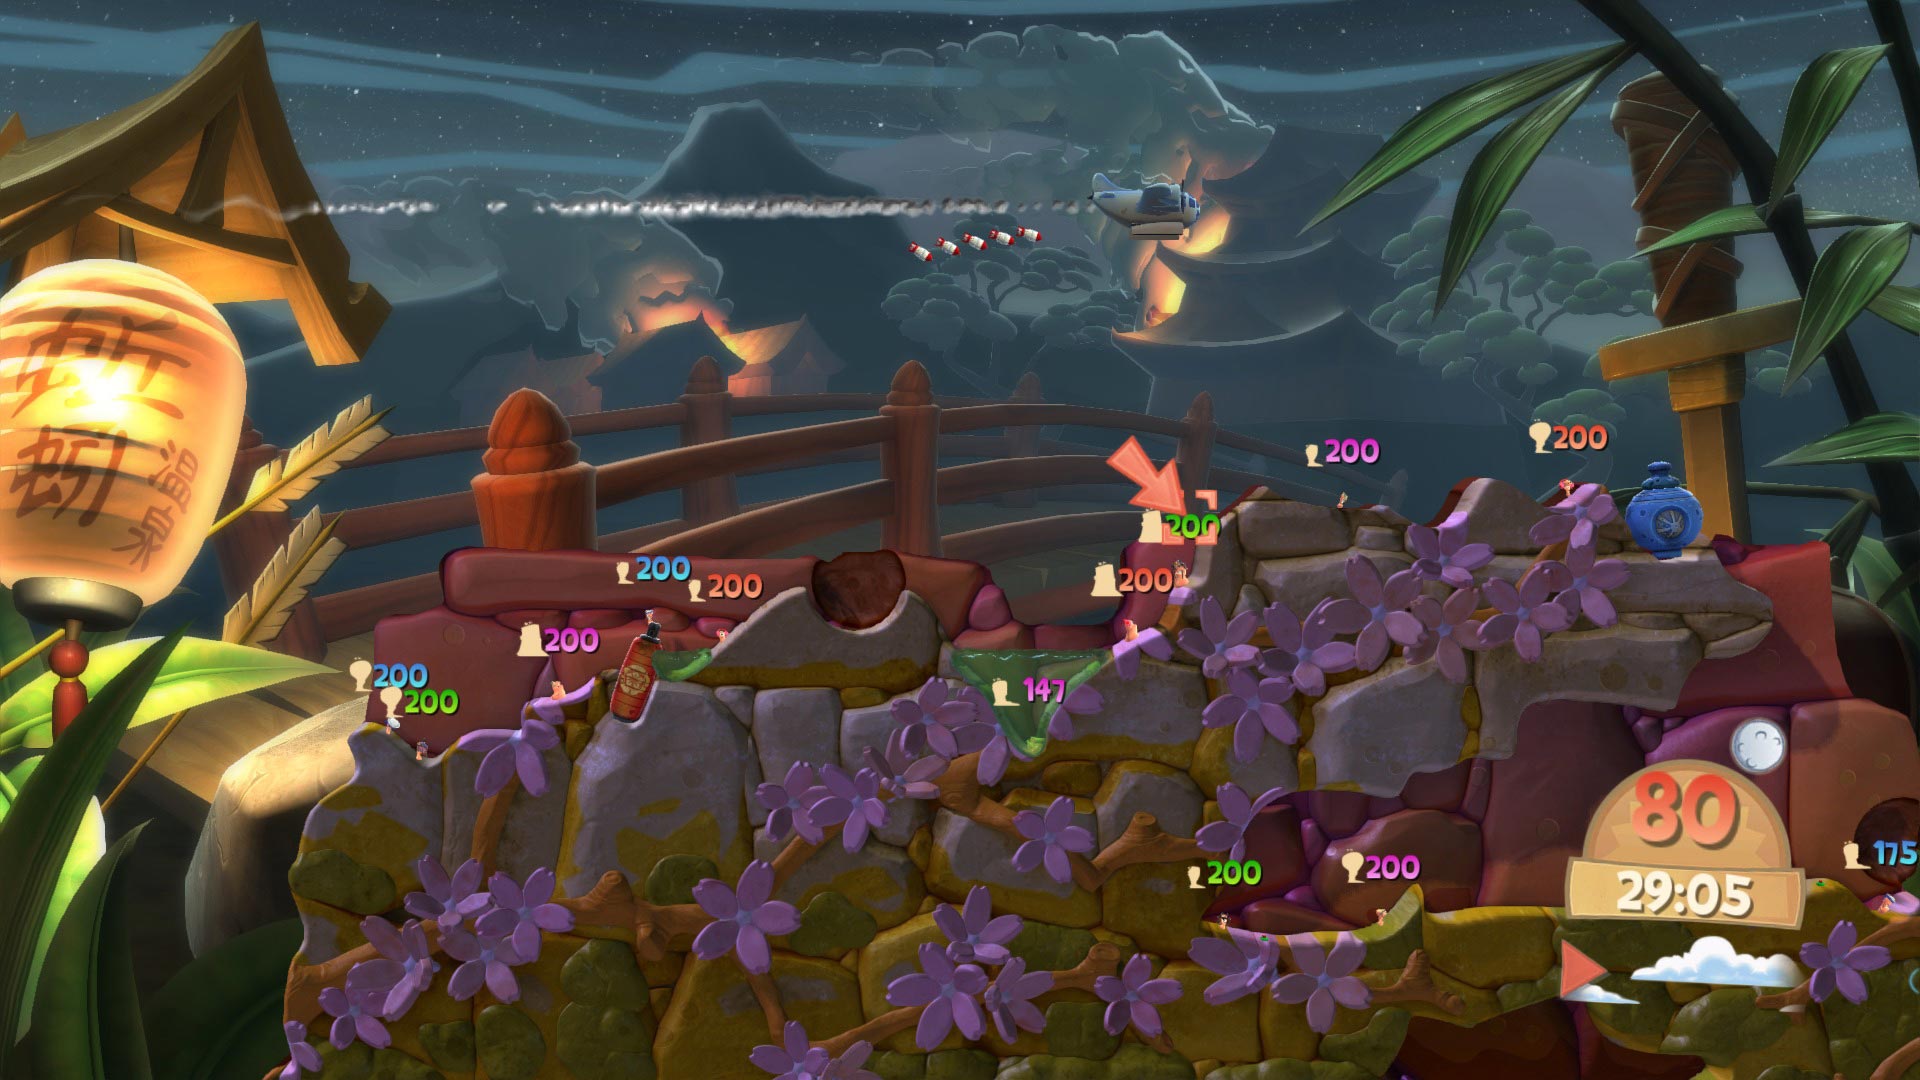 worms ps4 store